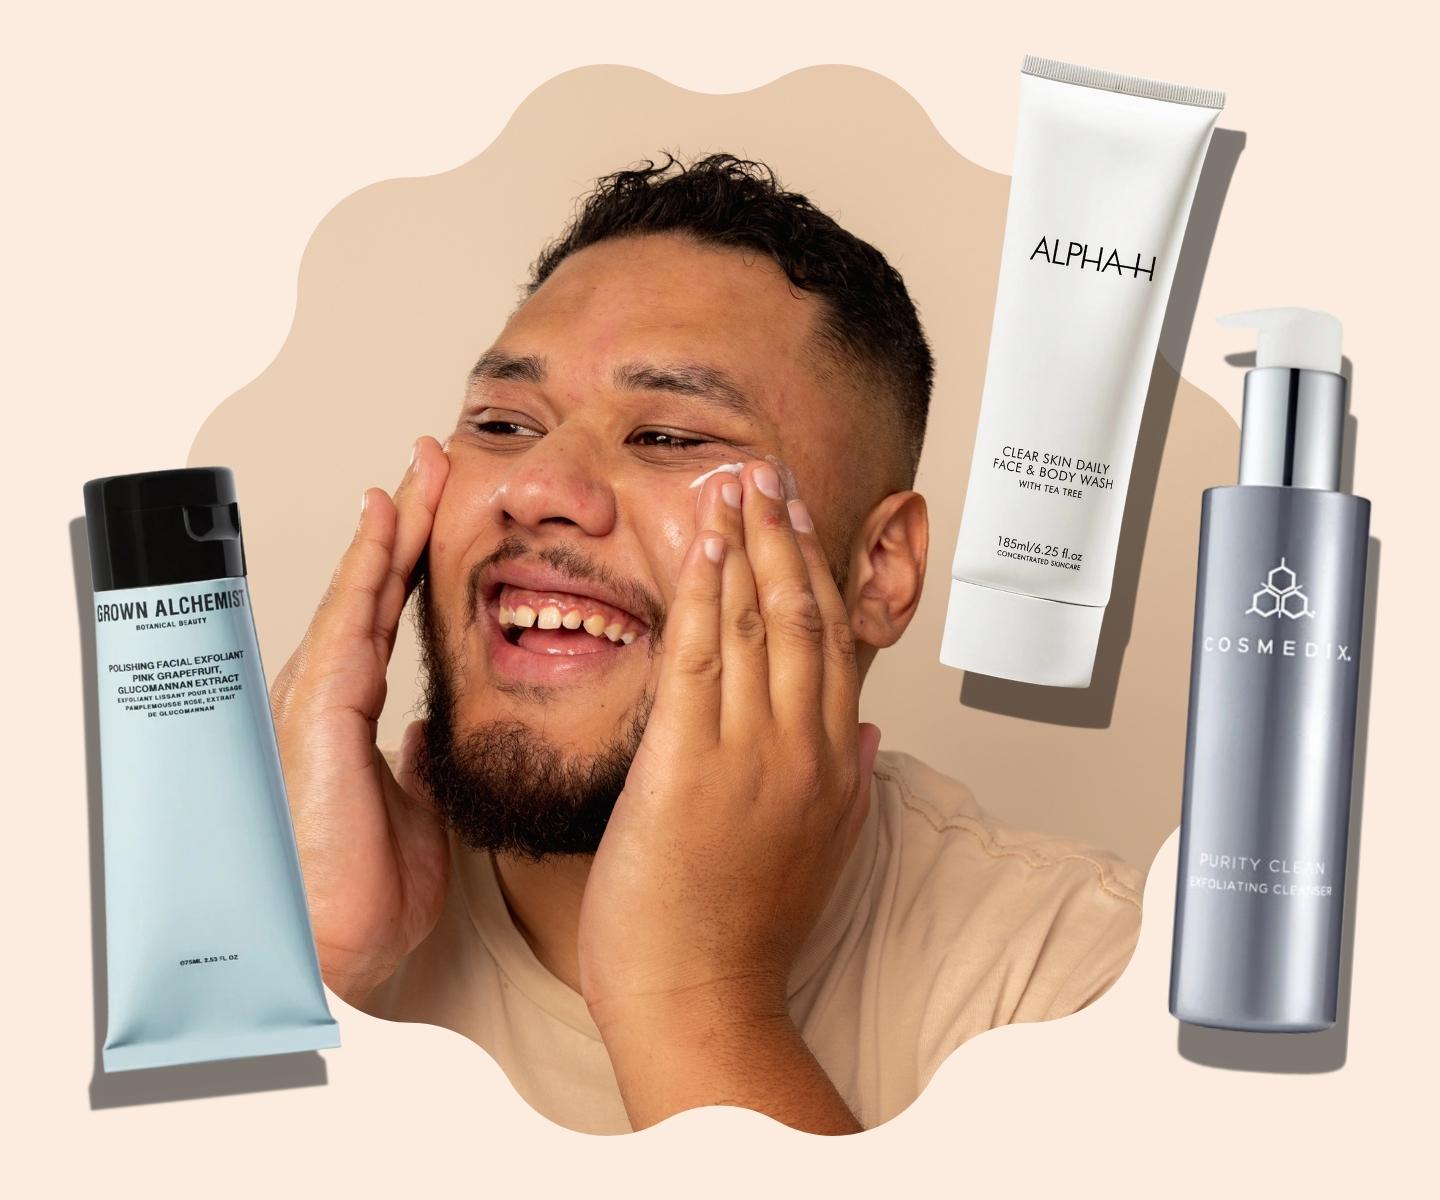 Exfoliating Products for Oily Skin-Grown Alchemist Polishing Facial Exfoliant, Alpha-H Clear Skin Daily Face and Body Wash, Cosmedix Purity Clean Exfoliating Cleanser